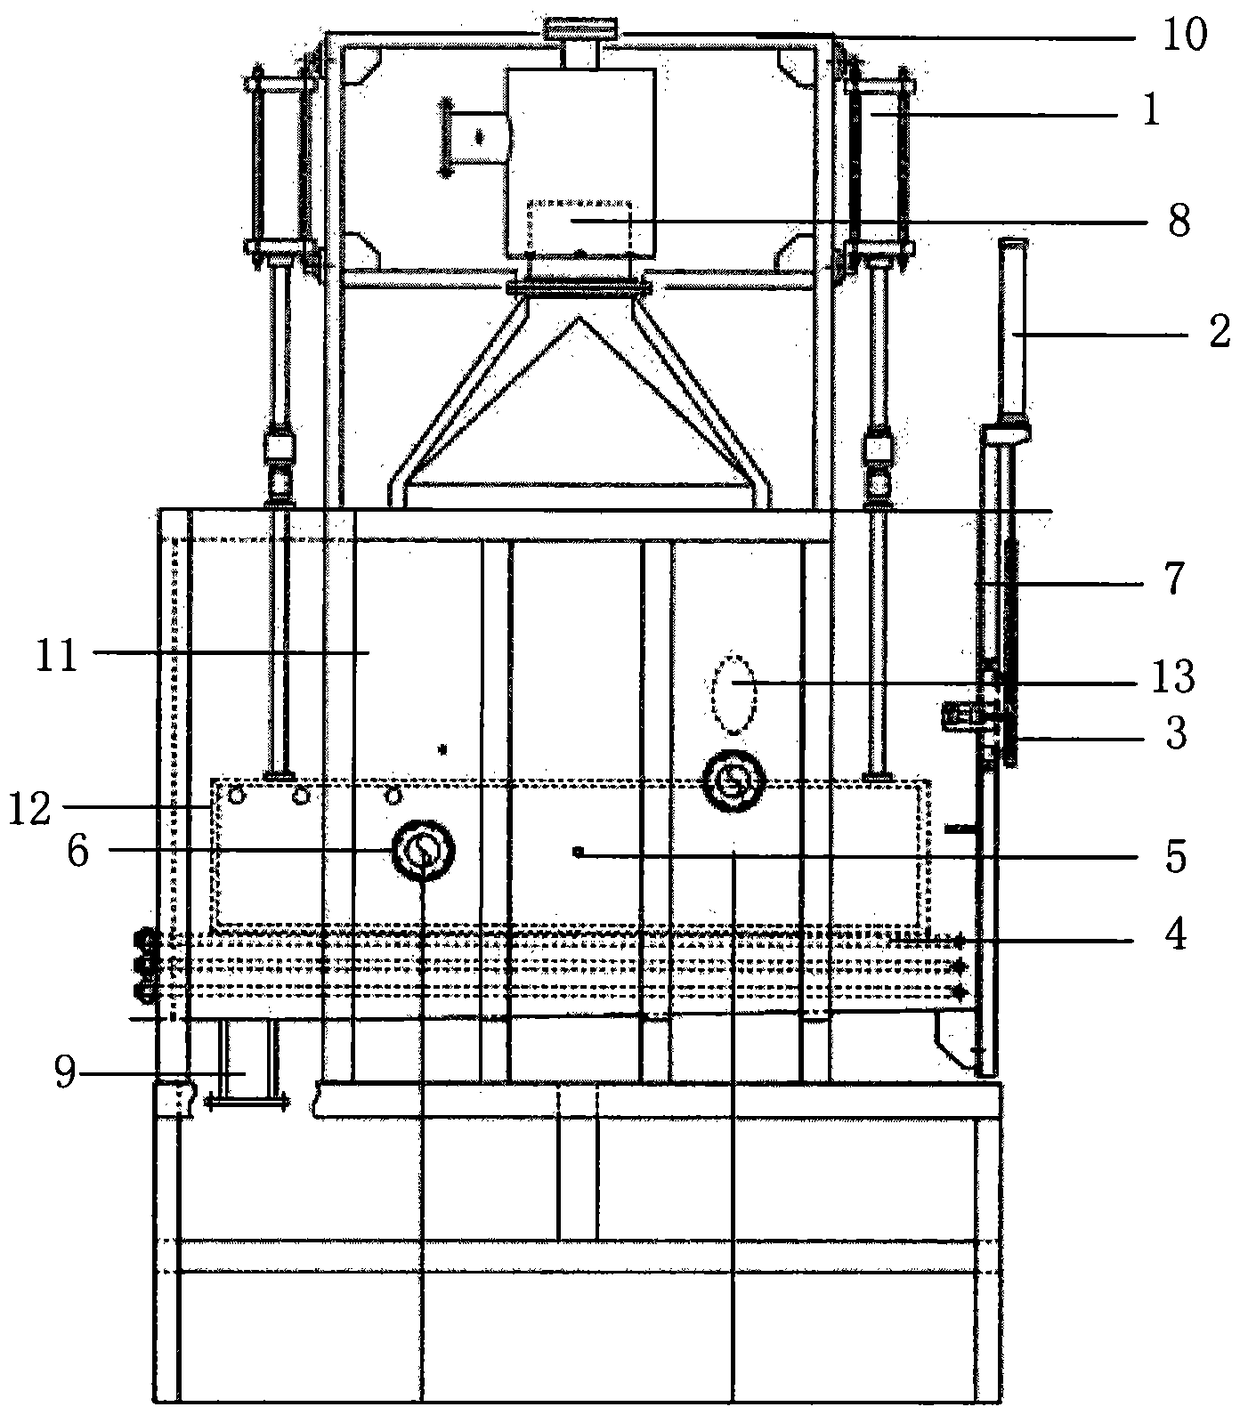 Low-temperature frying equipment and method for frying fried food